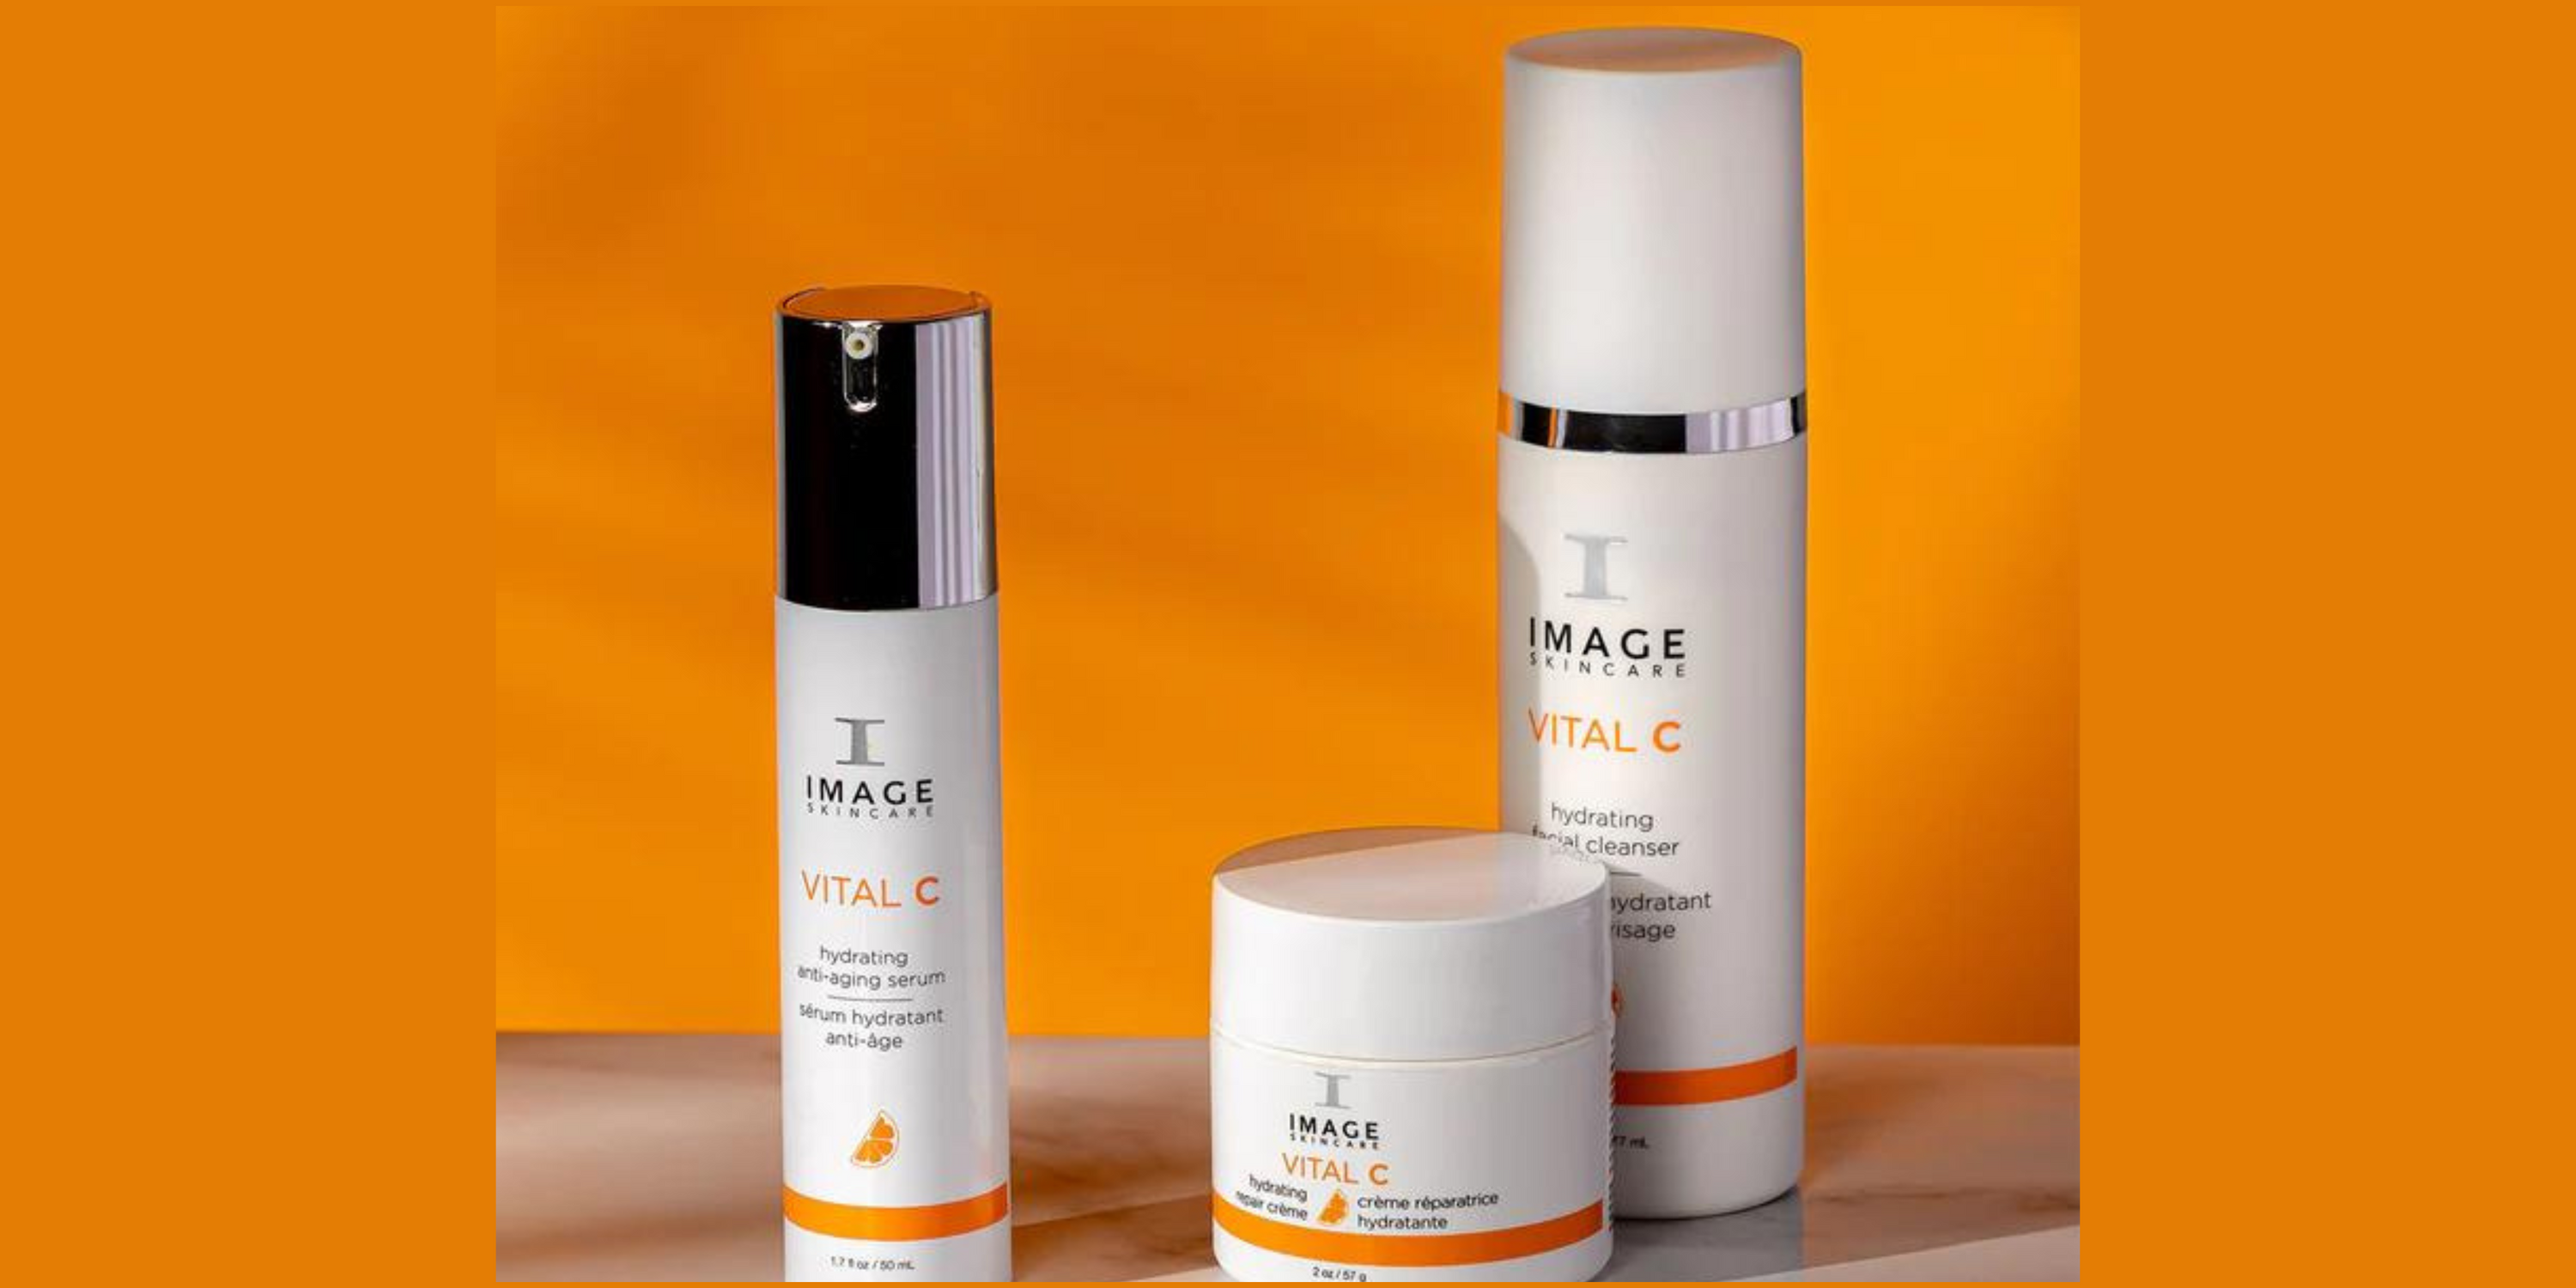 A Guide to the IMAGE SKINCARE Vital C Hydrating Anti-Ageing Serum